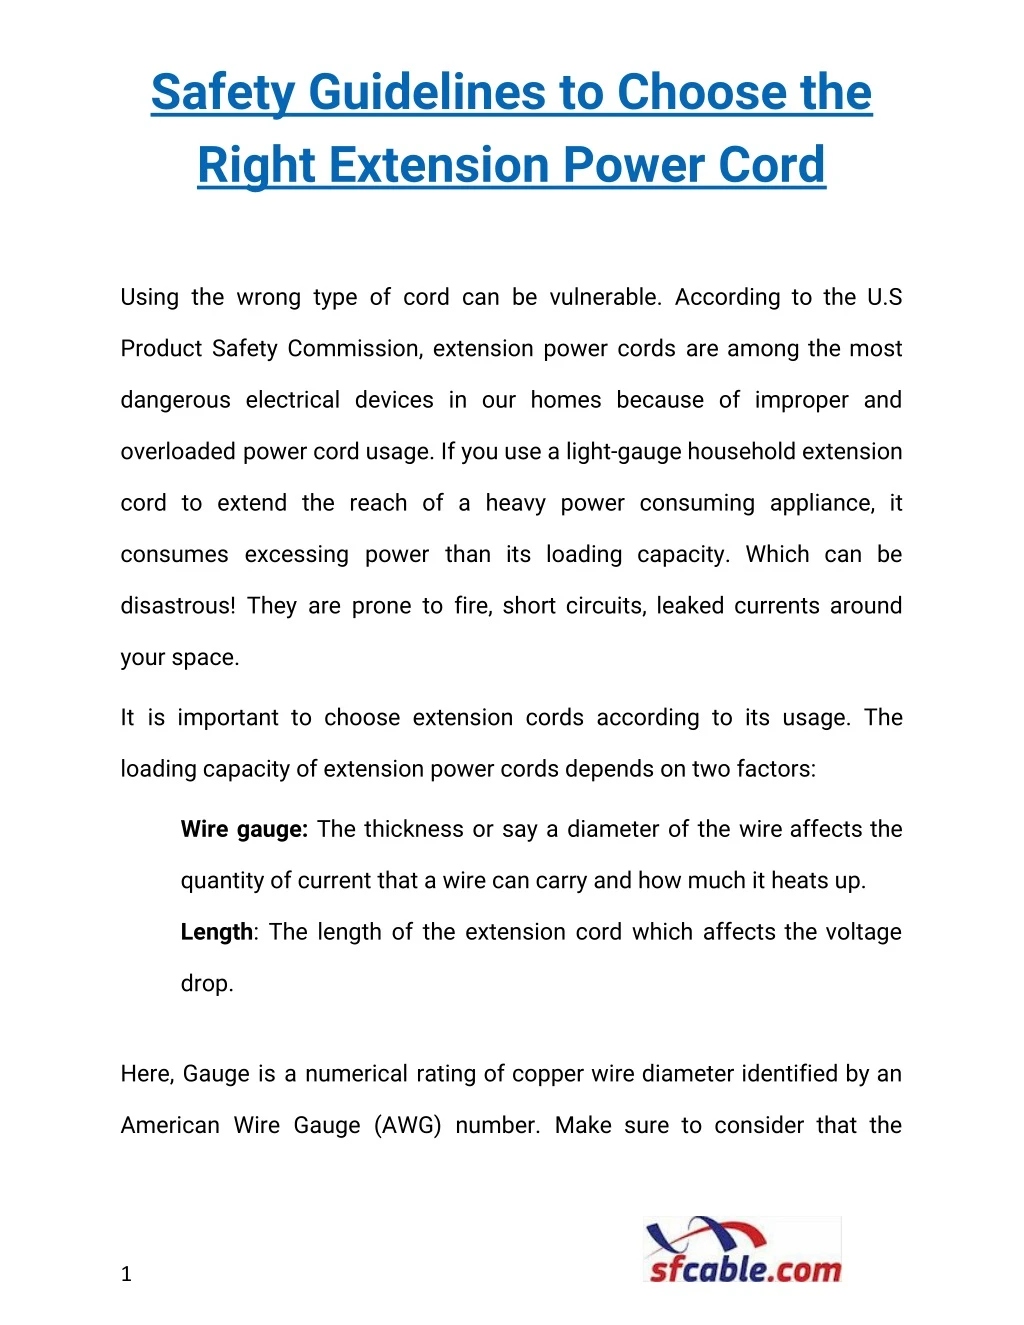 safety guidelines to choose the right extension